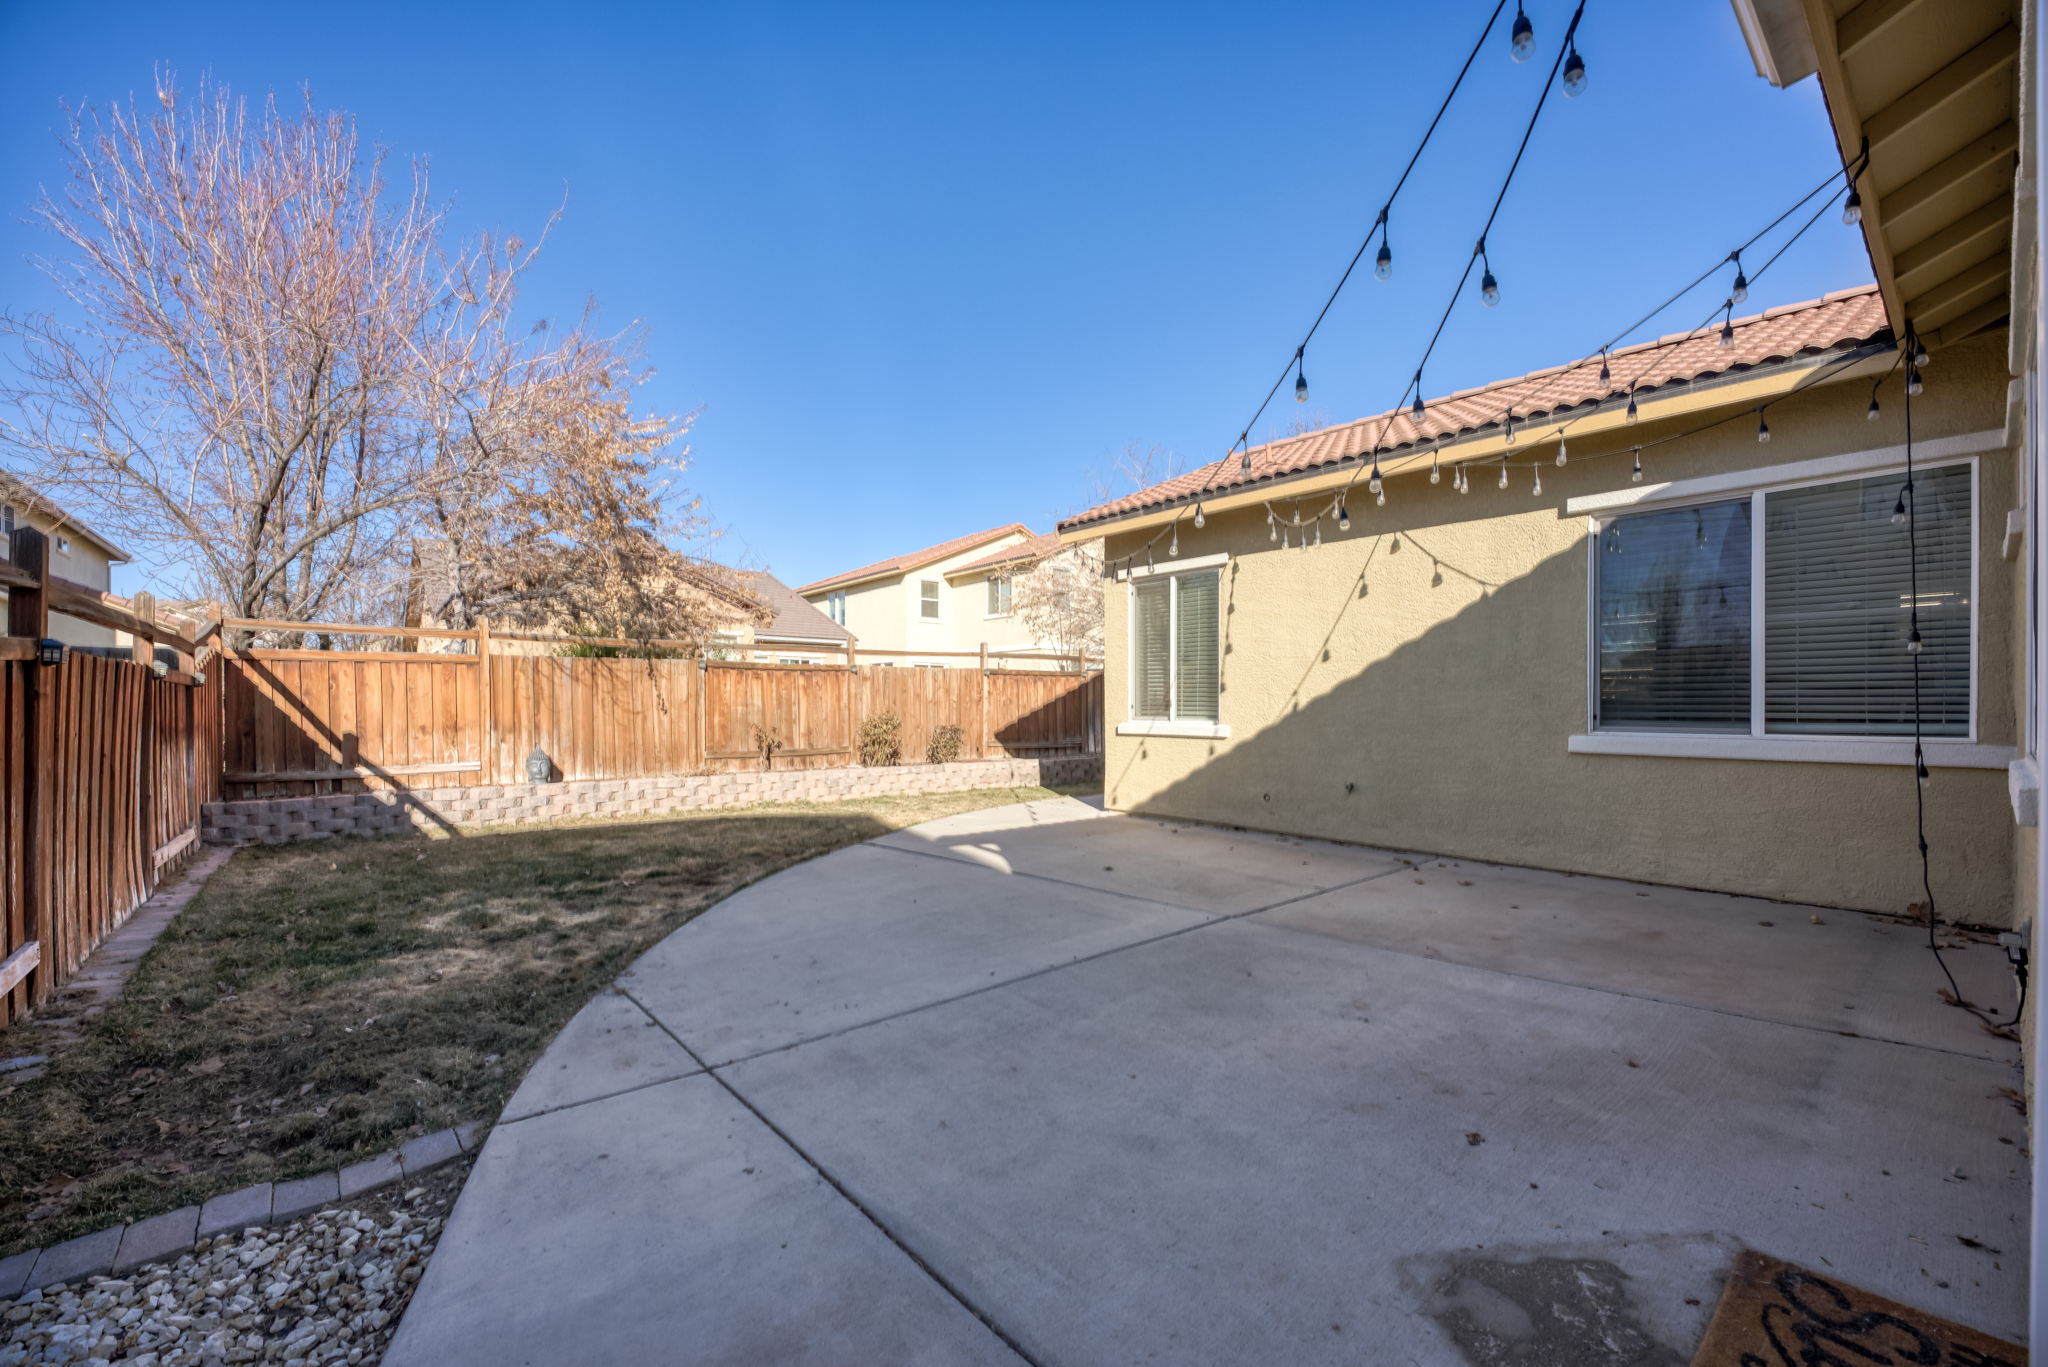 3686 Caymus Dr, Sparks, NV 89436, USA Photo 30